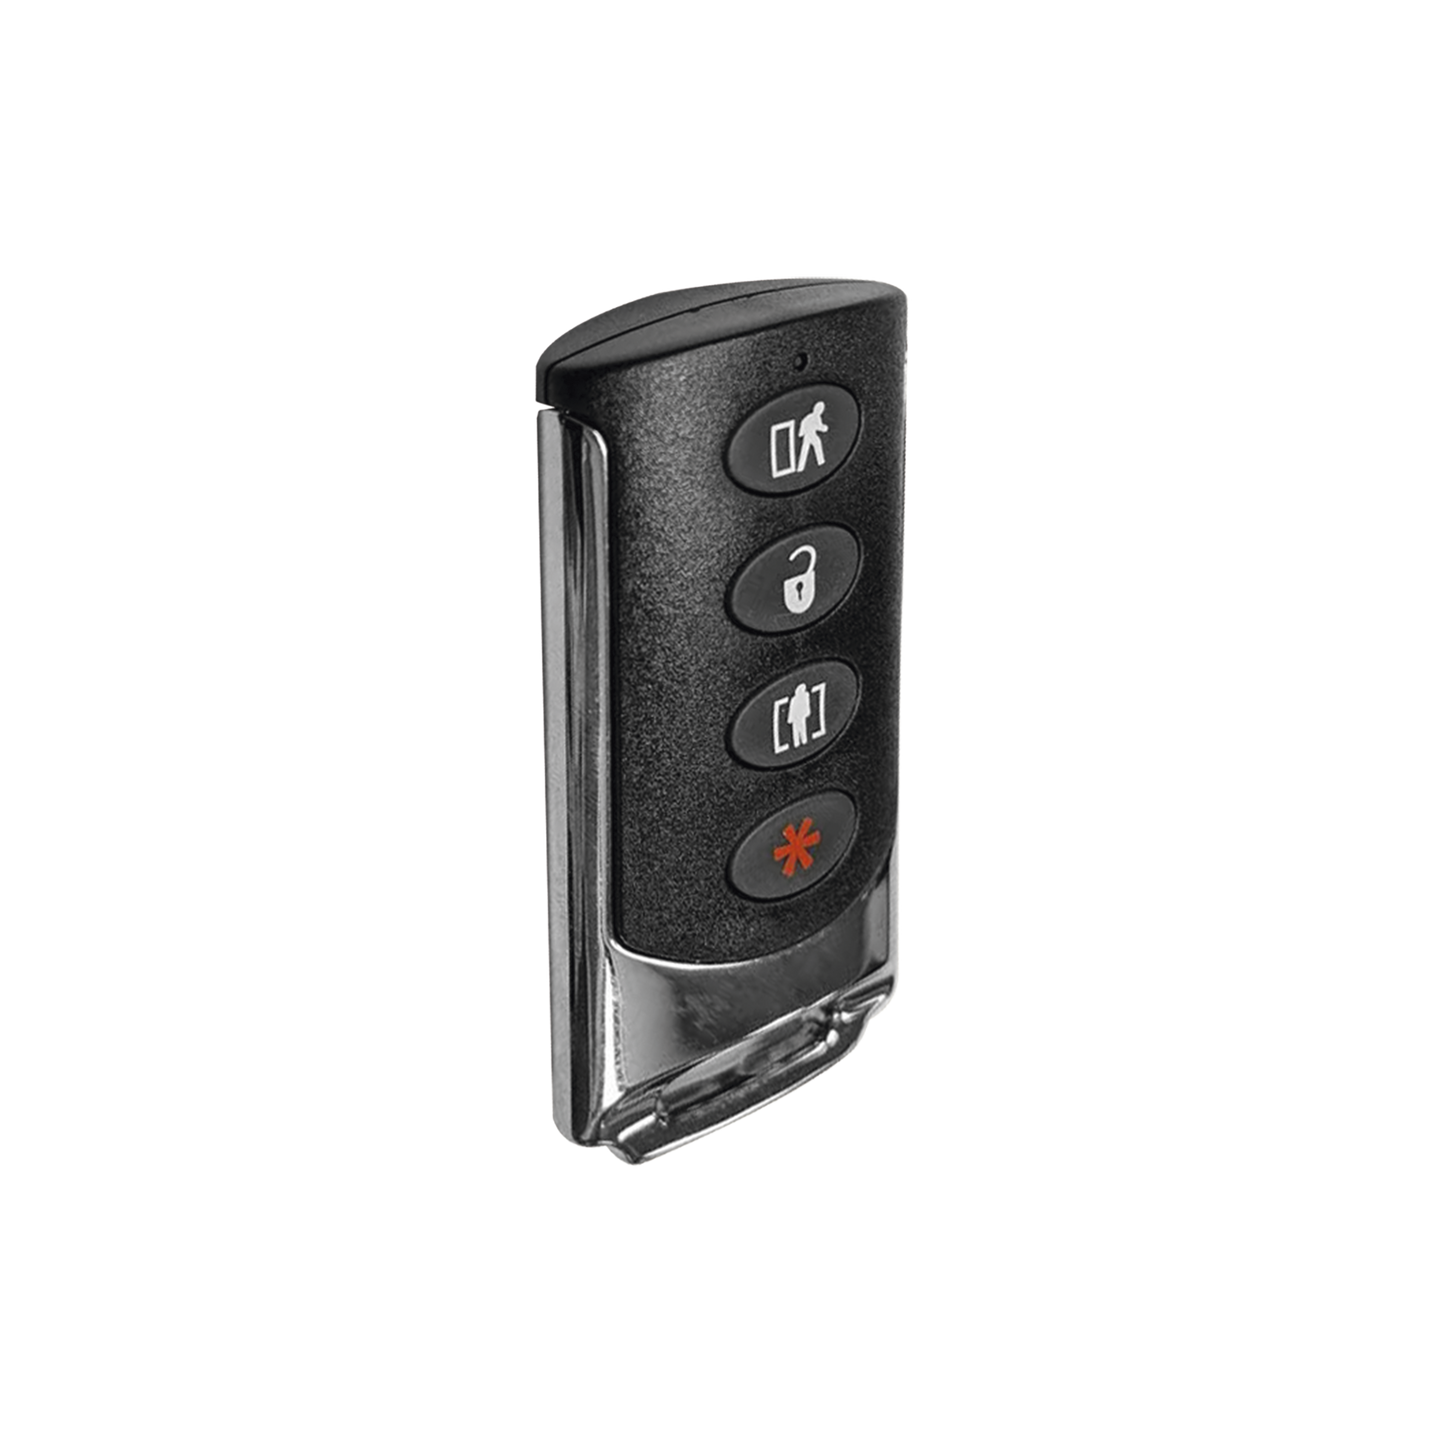 4-Button Wireless Remote Control, Heavy Duty for Total armed/ Disarmed/ Partial/ Panic